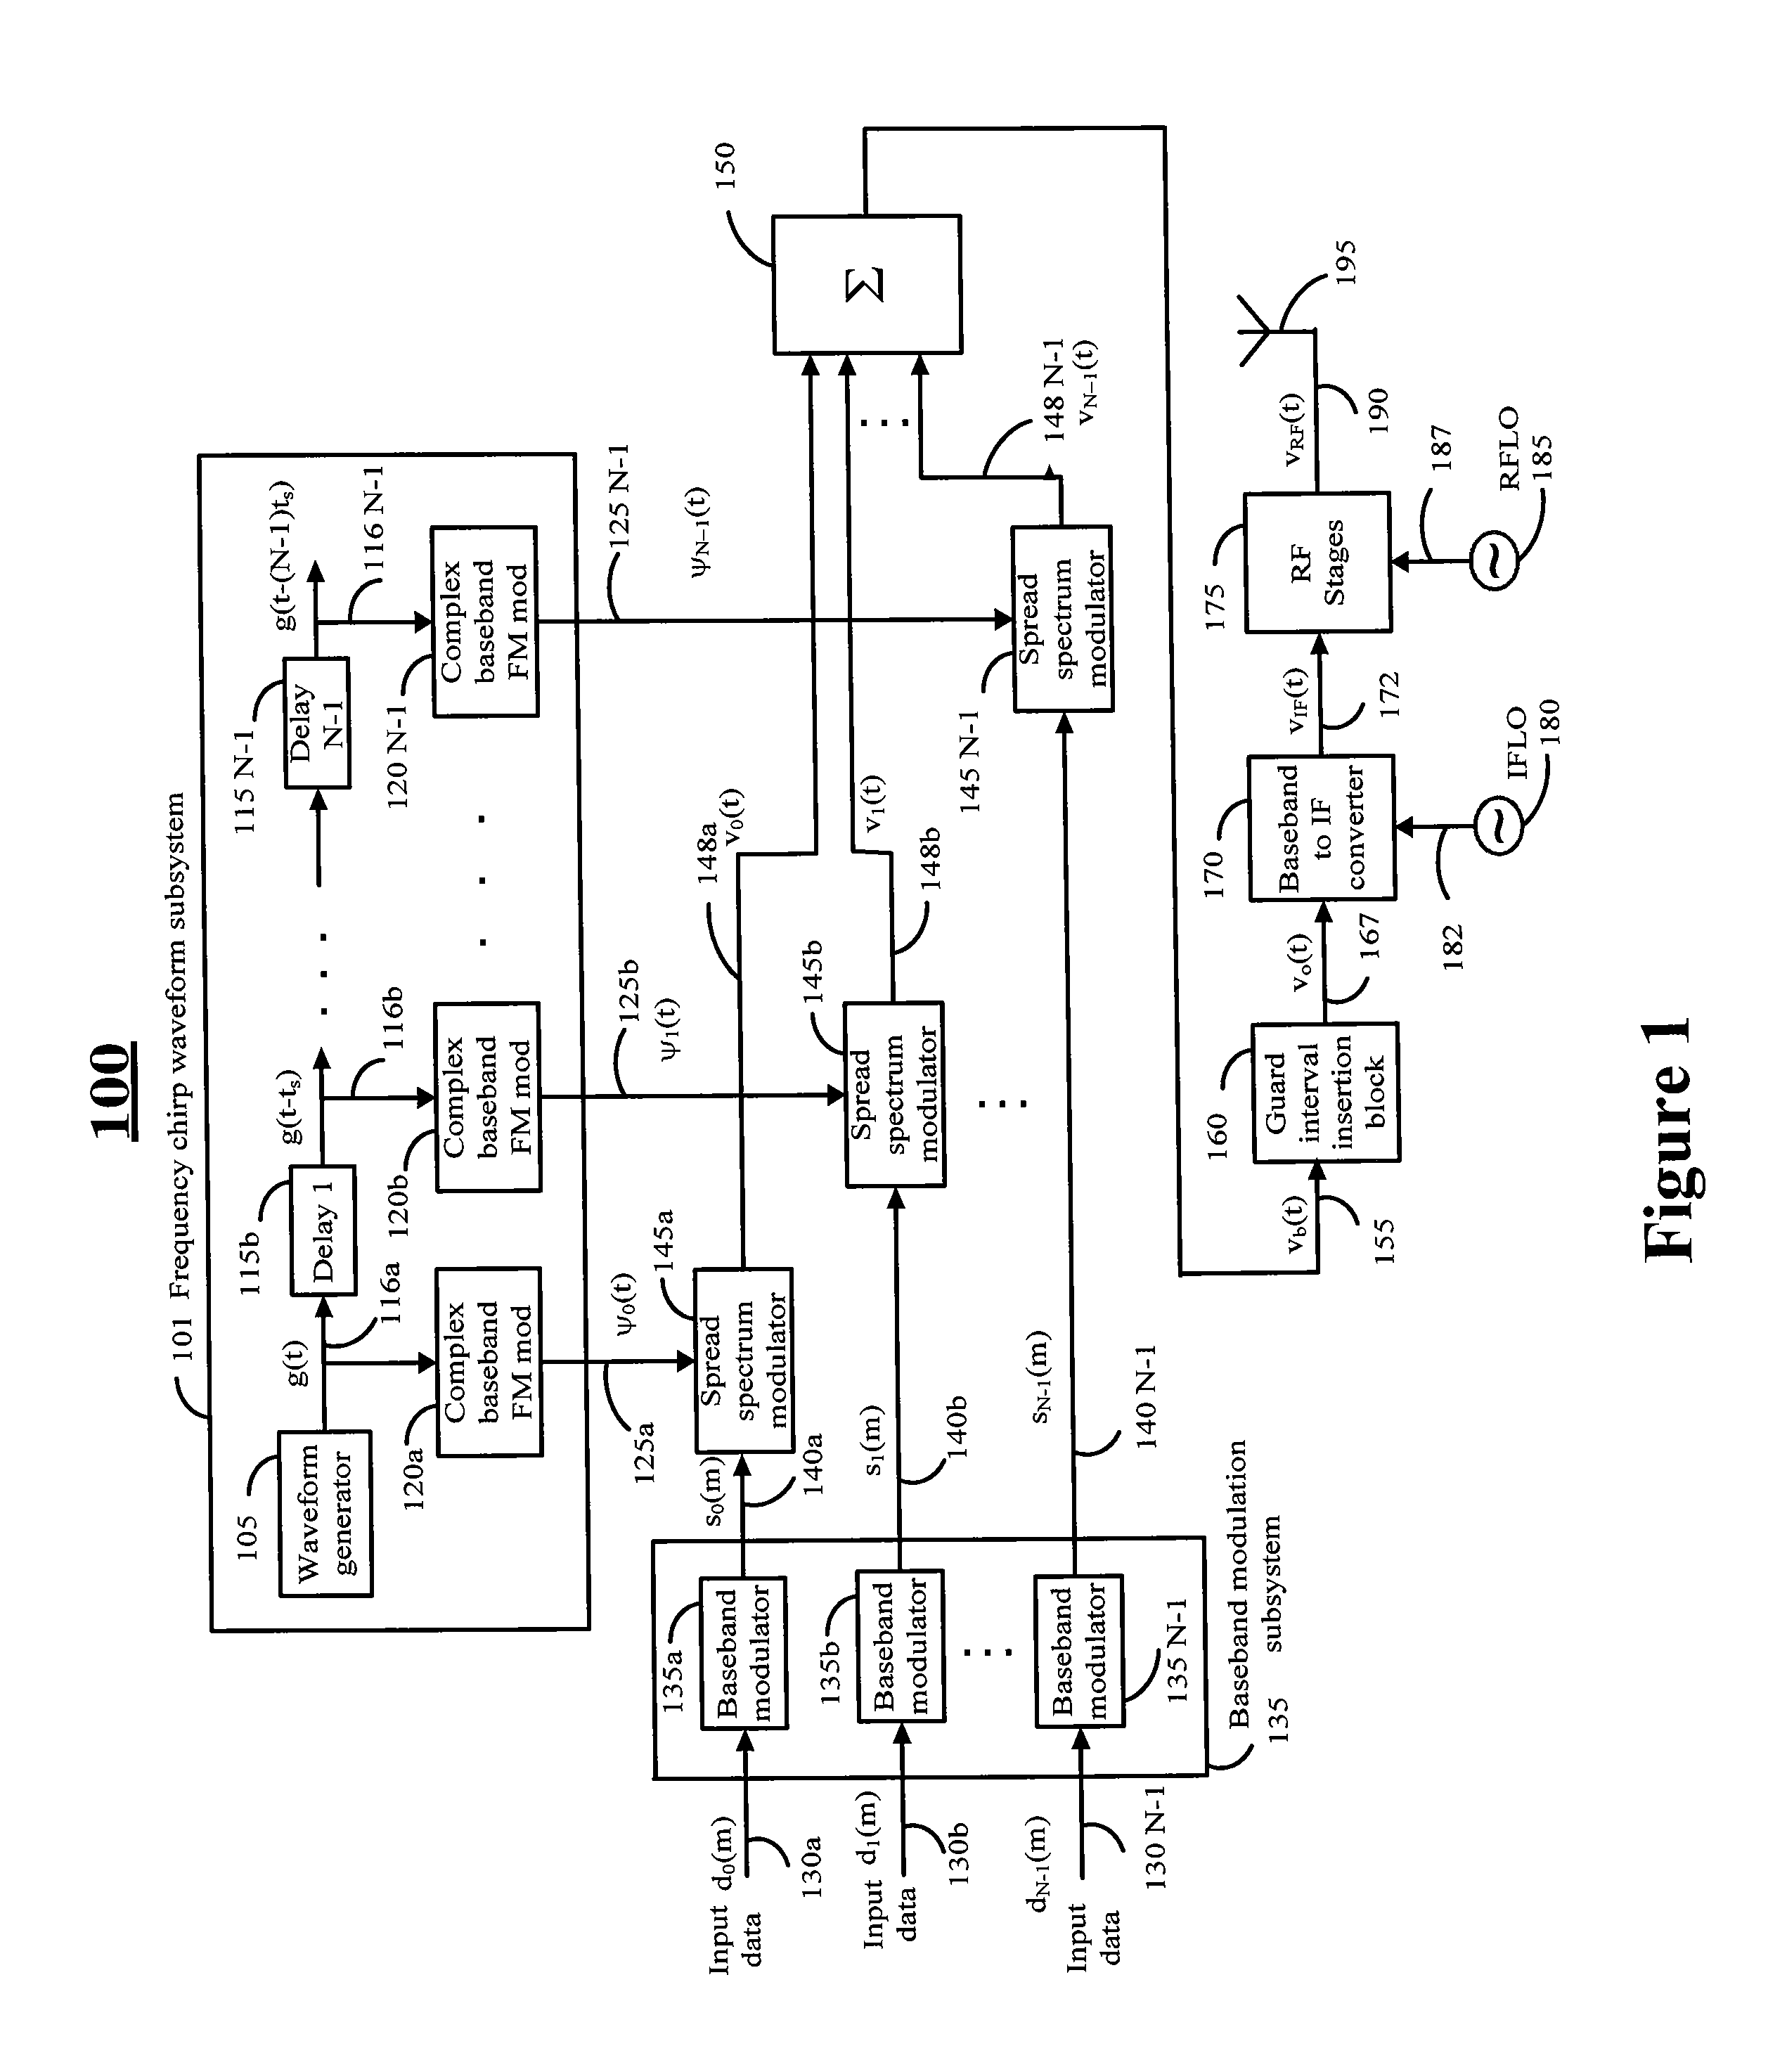 Orthogonal frequency chirp multiple accessing systems and methods